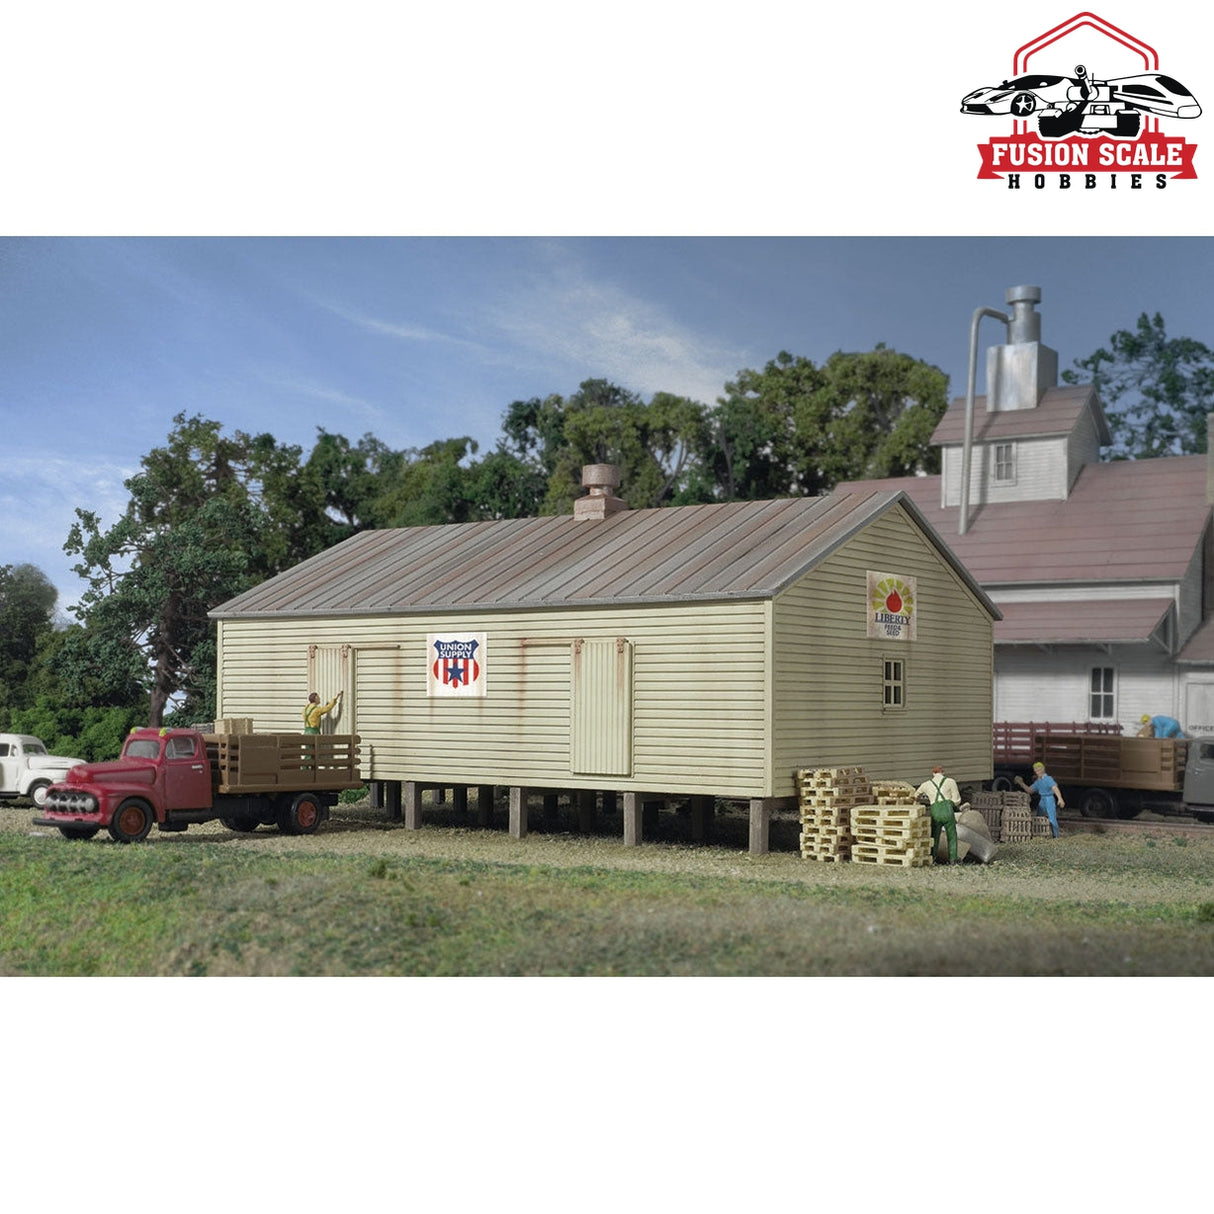 Walthers Cornerstone N Scale CoOperative Storage Shed on Pilings Kit 41/4 x 23/4 x 21/4" 10.6 x 6.8 x 5.6cm